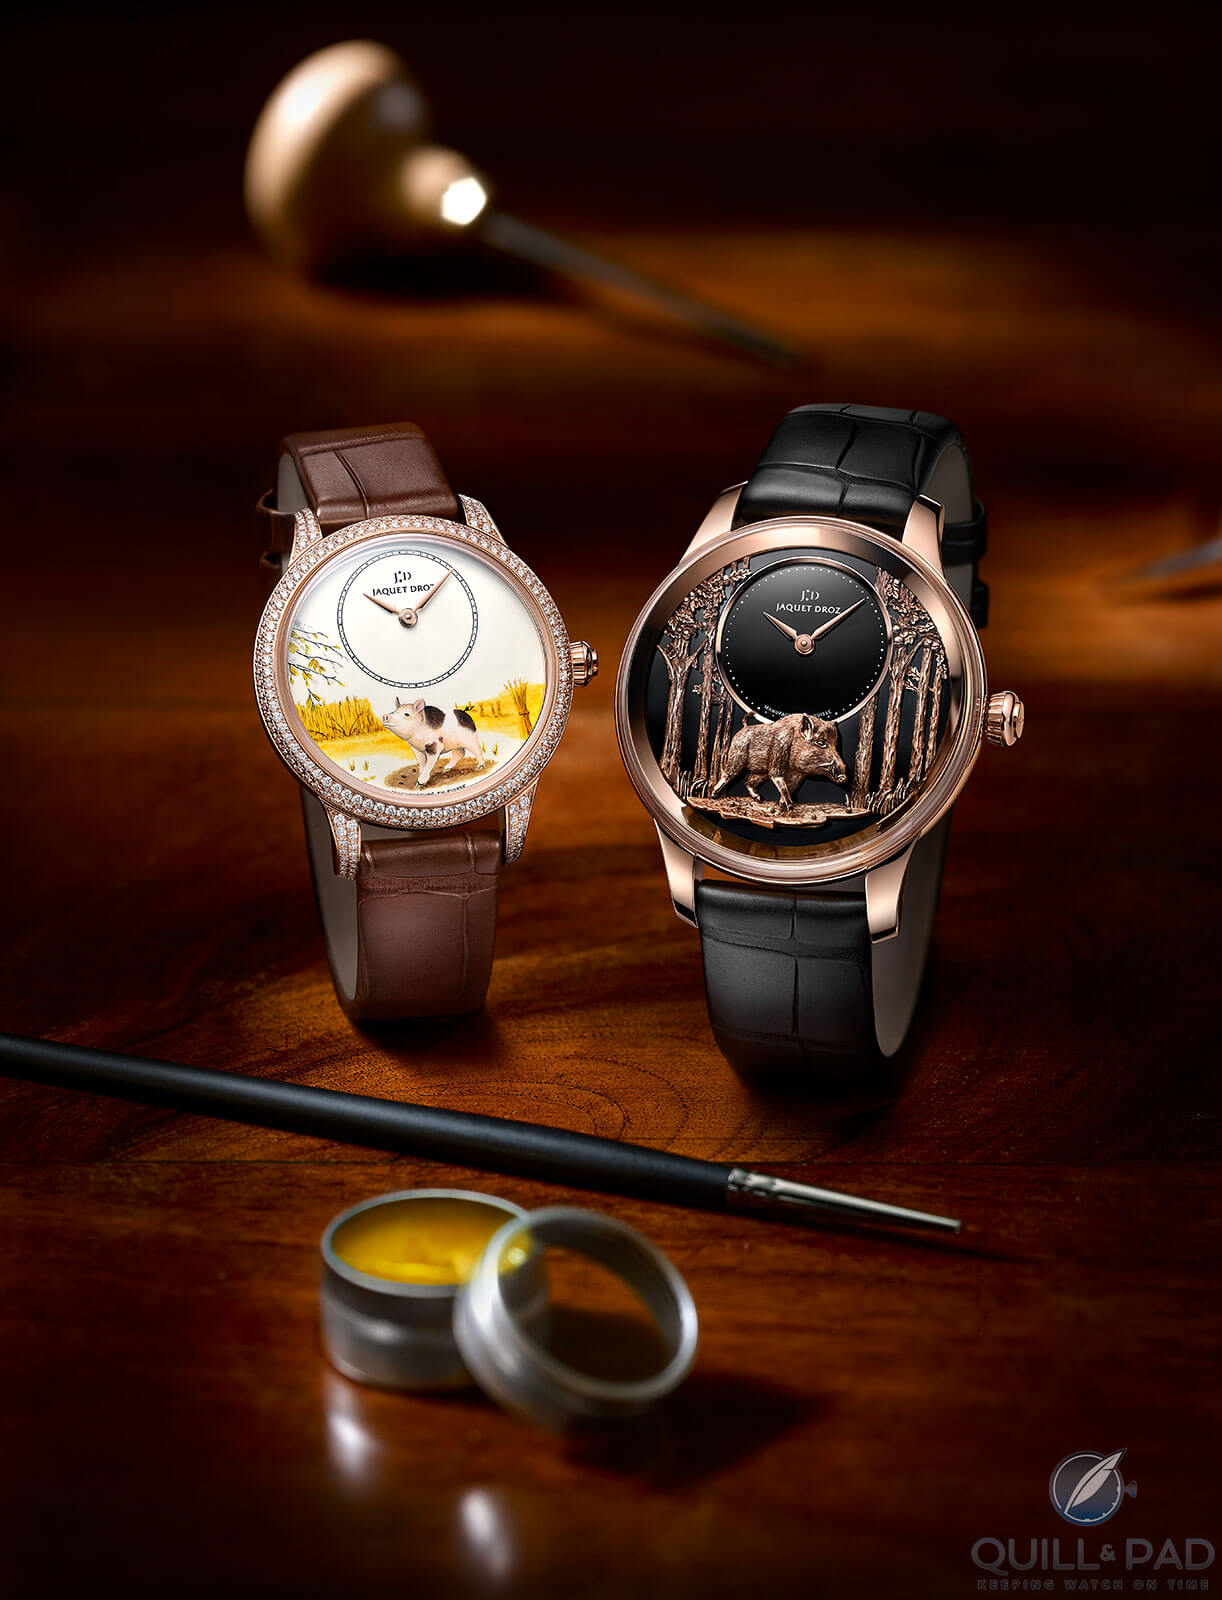 Jaquet Droz Petite Heure Minute Pig diamond-set and Petite Heure Minute Relief Pig in red gold